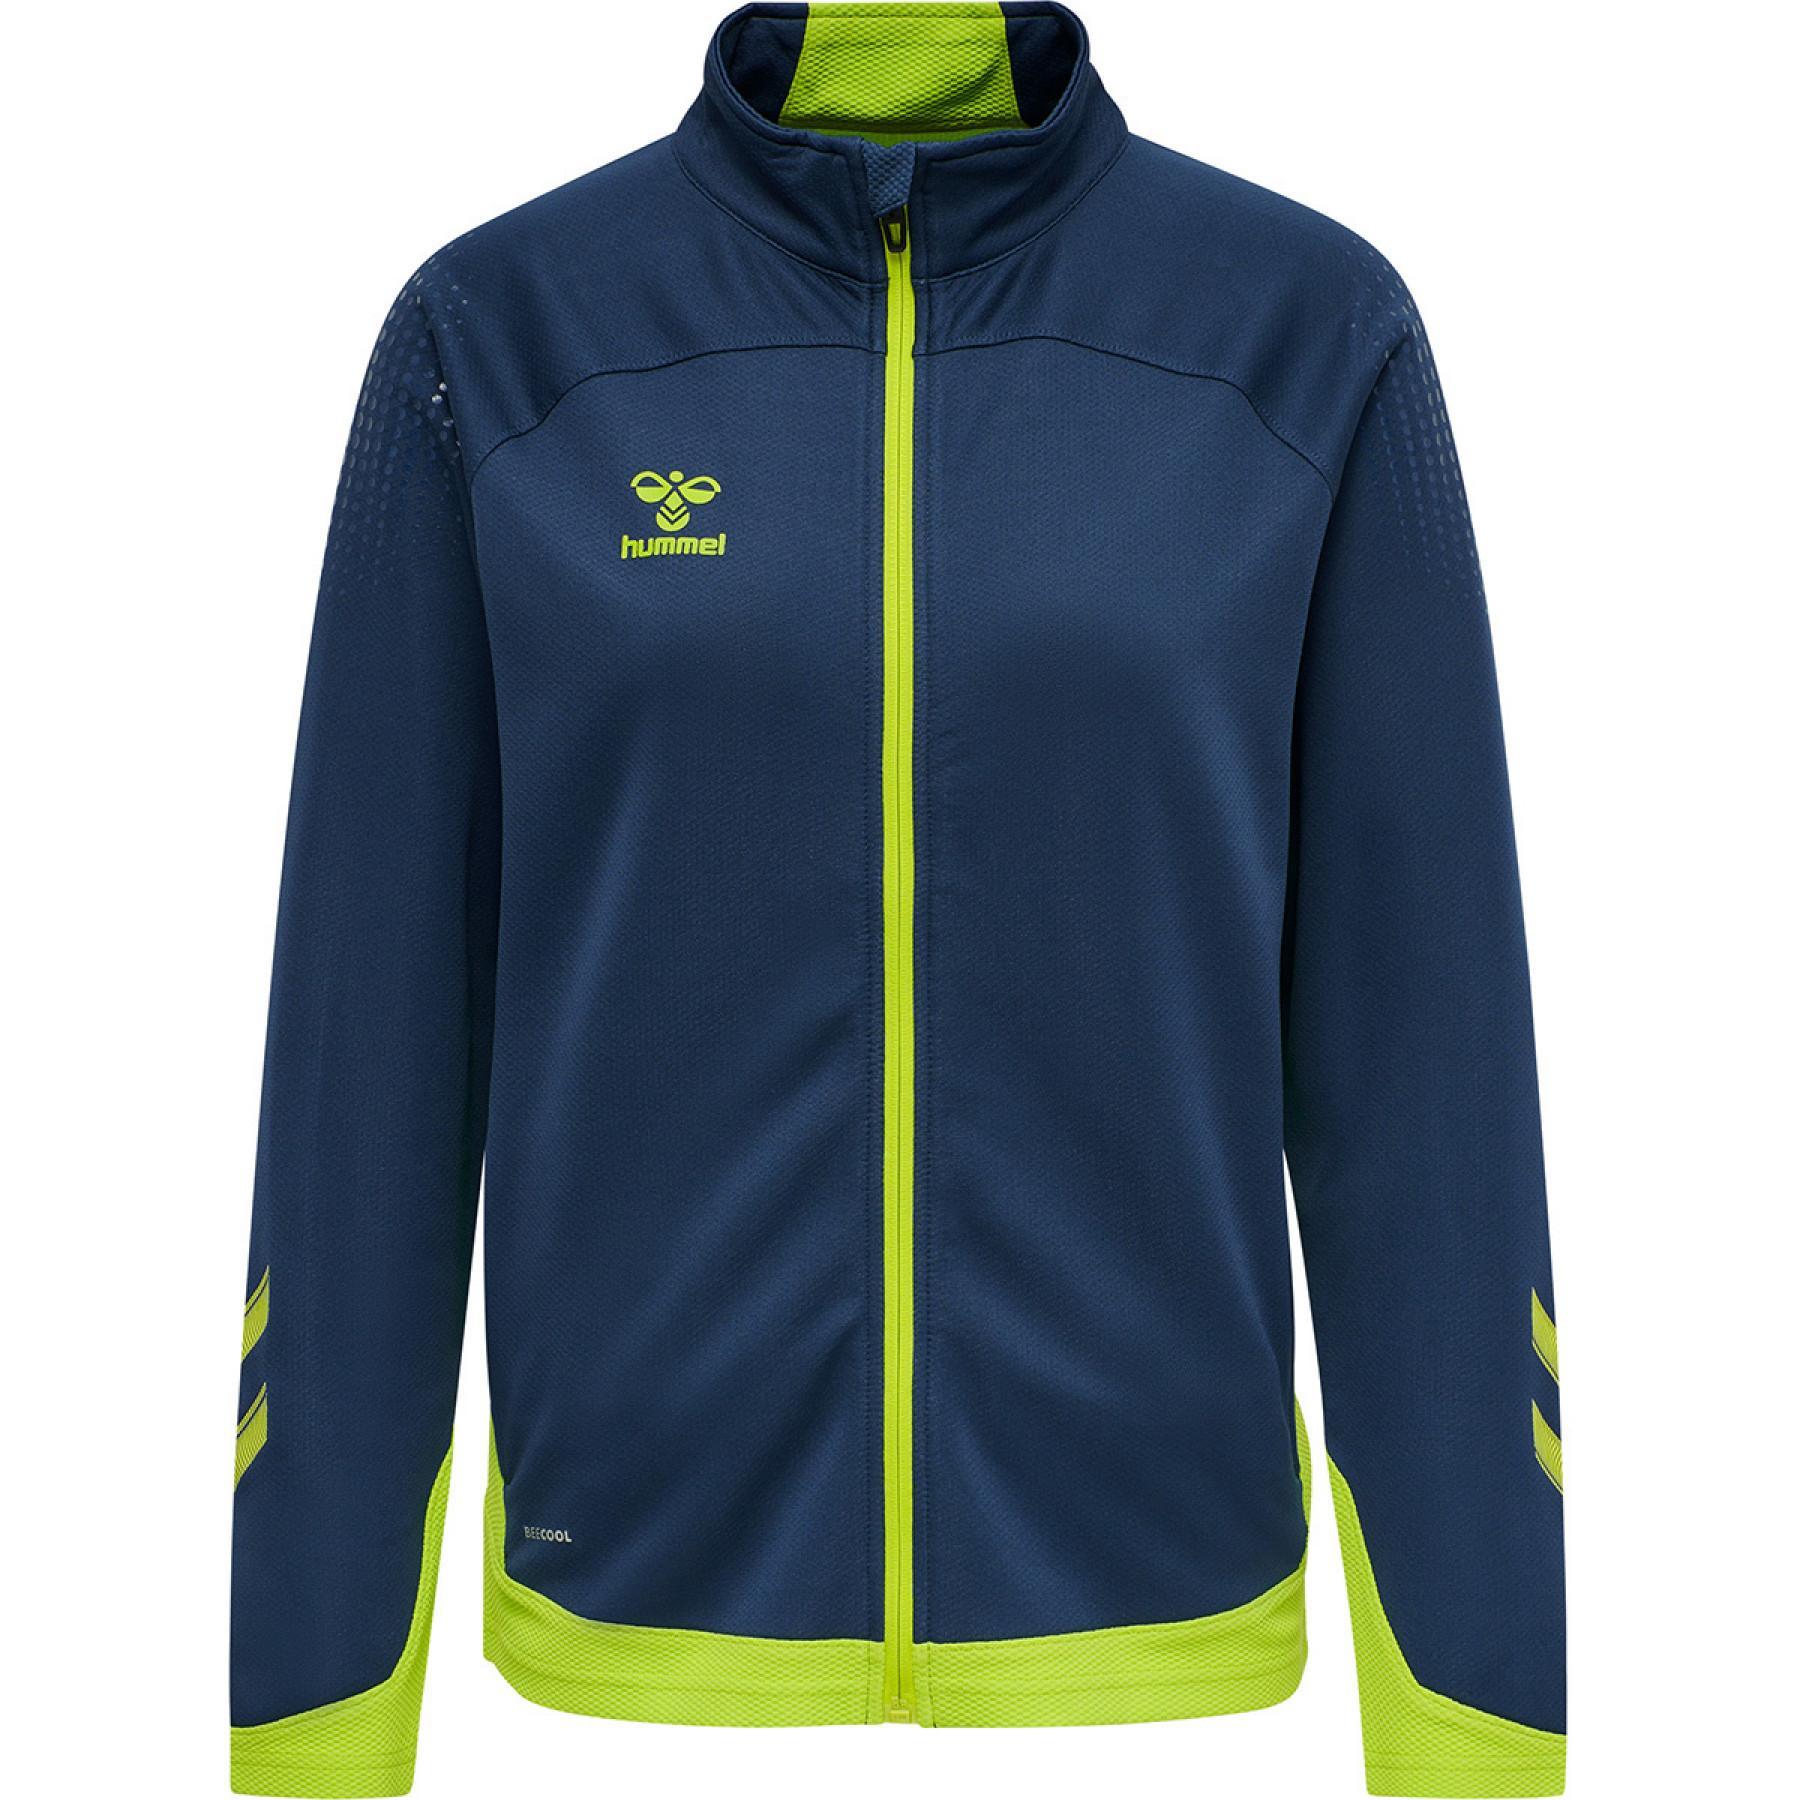 Women's zip-up jacket Hummel hmlLEAD poly - Jackets and tracksuits -  Women's volleyball wear - Volleyball wear